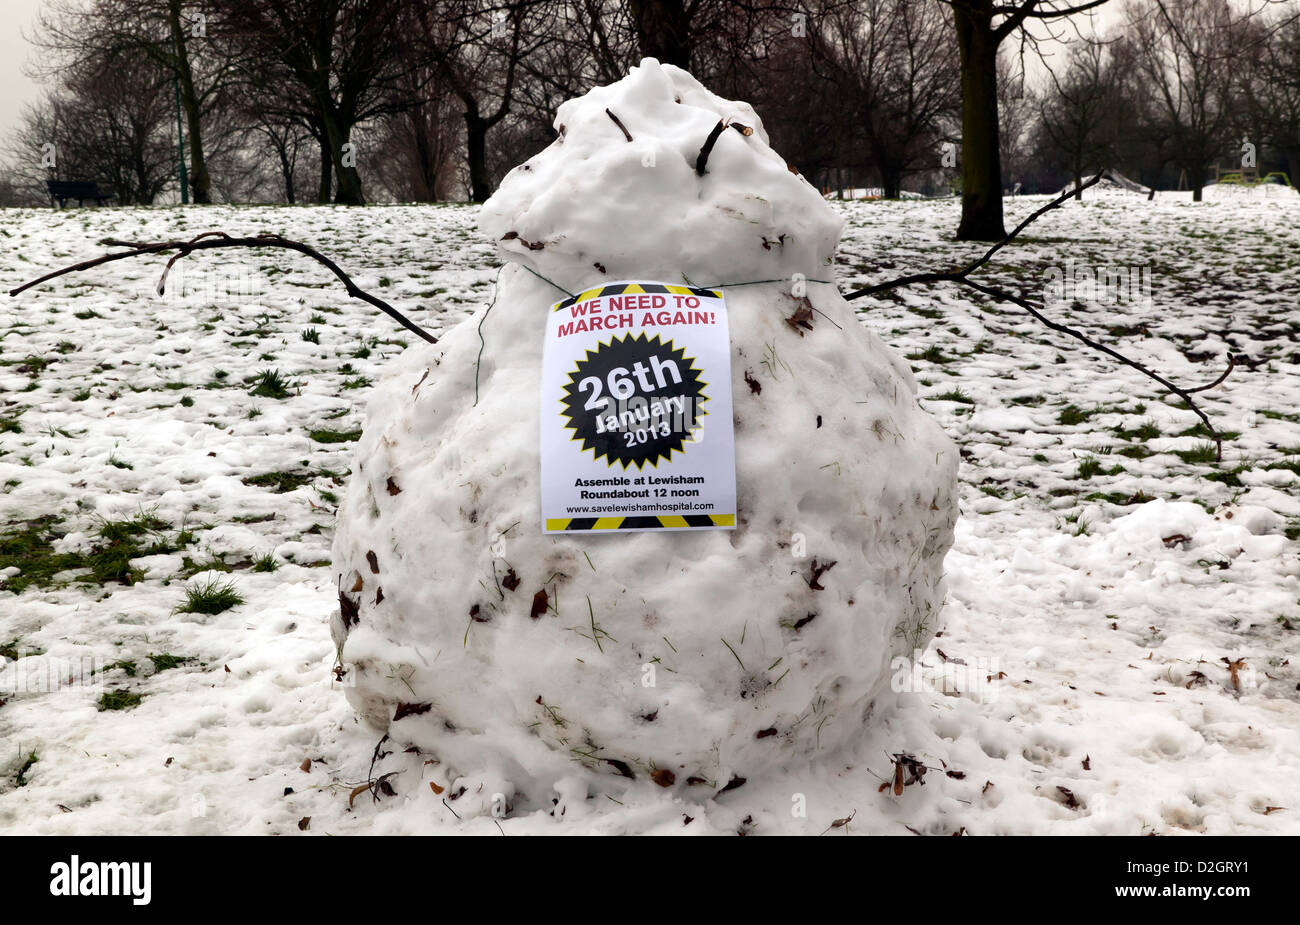 A snowman advertising the protest march to help save Lewisham Hospital in the latest round of Government NHS cuts. Stock Photo